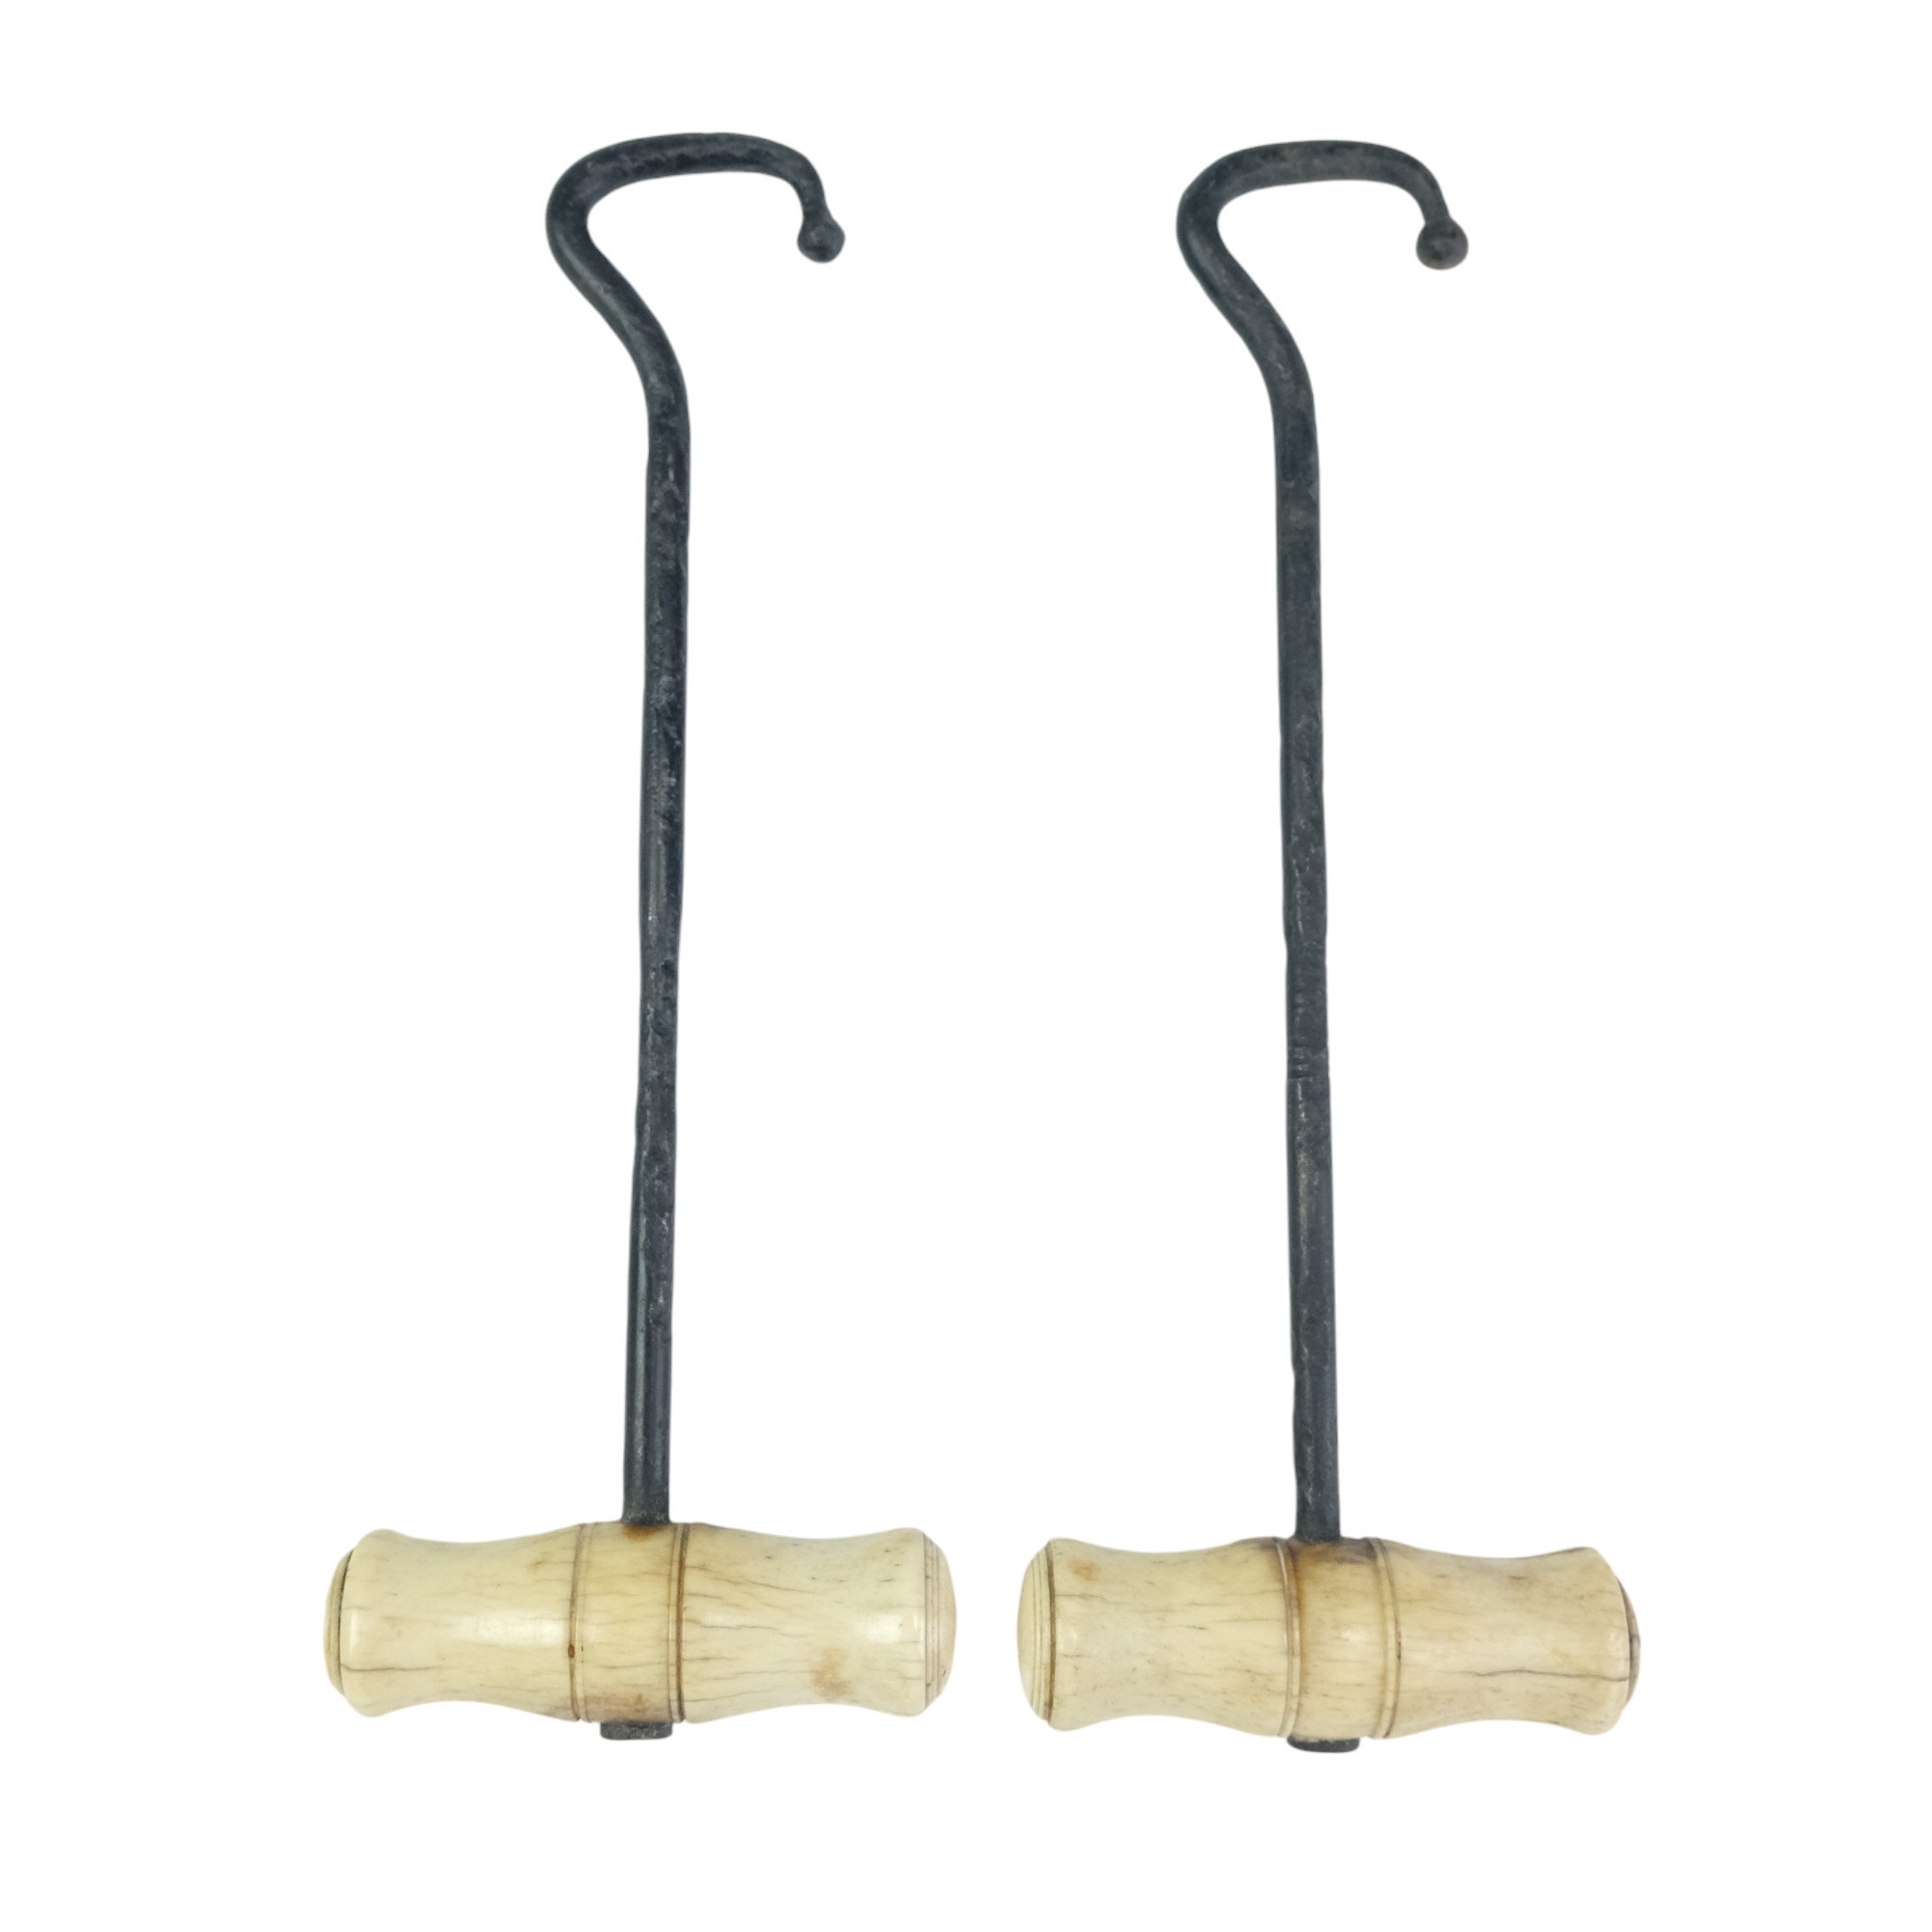 A pair of Victorian turned-bone-handled boot pulls